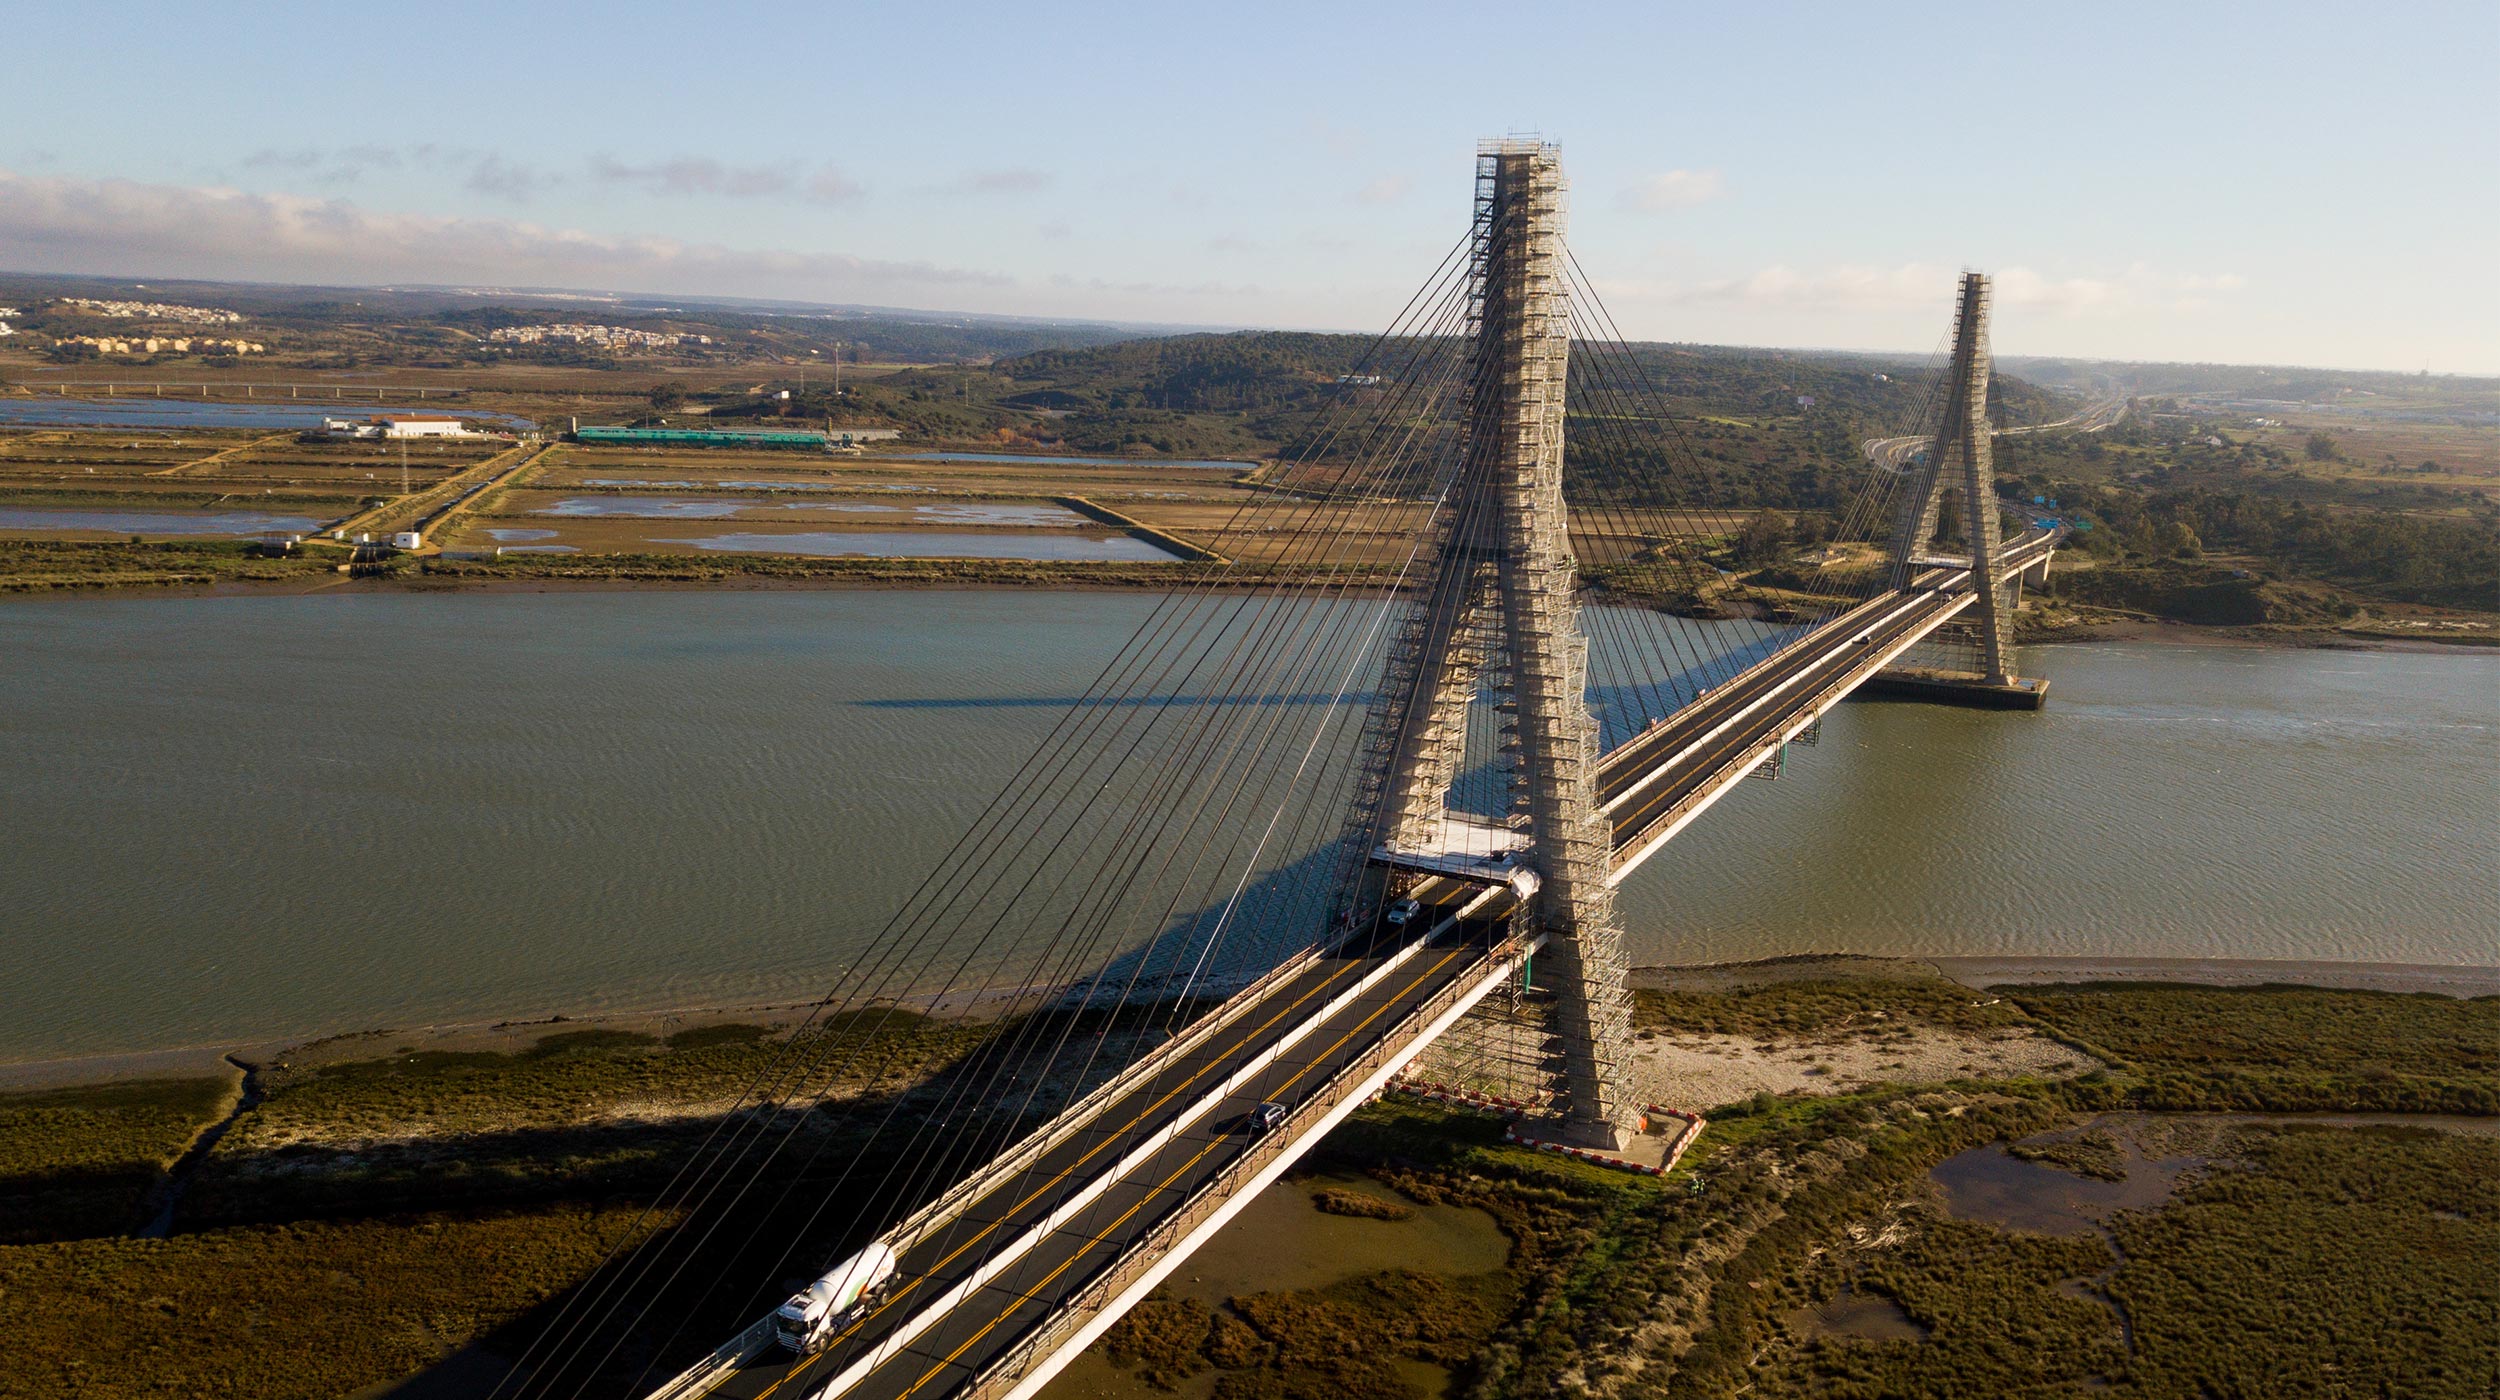 The International Bridge over the Guadiana River joins Spain and Portugal. The composite bridge was designed by the engineer José Luis Cancio Martins, with a length of 666 metres, divided into five spans.